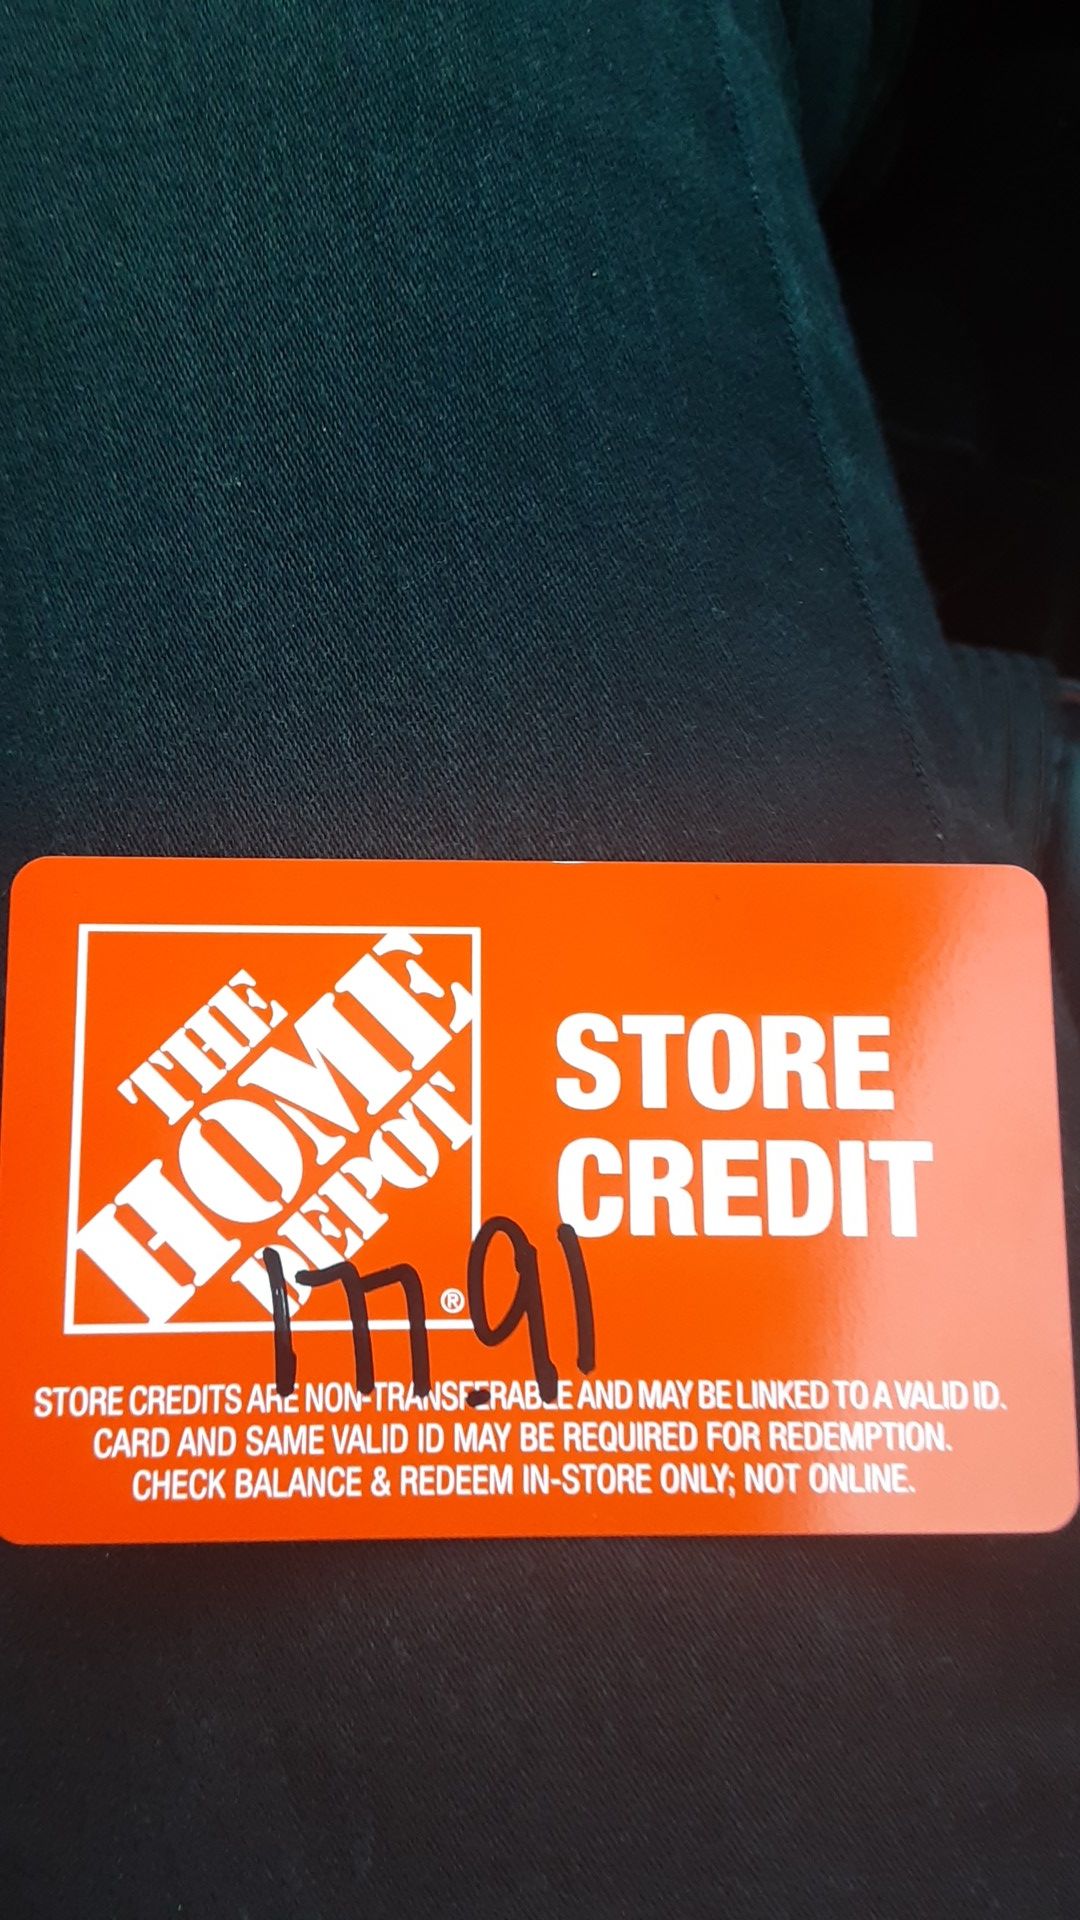 Home depot store credit